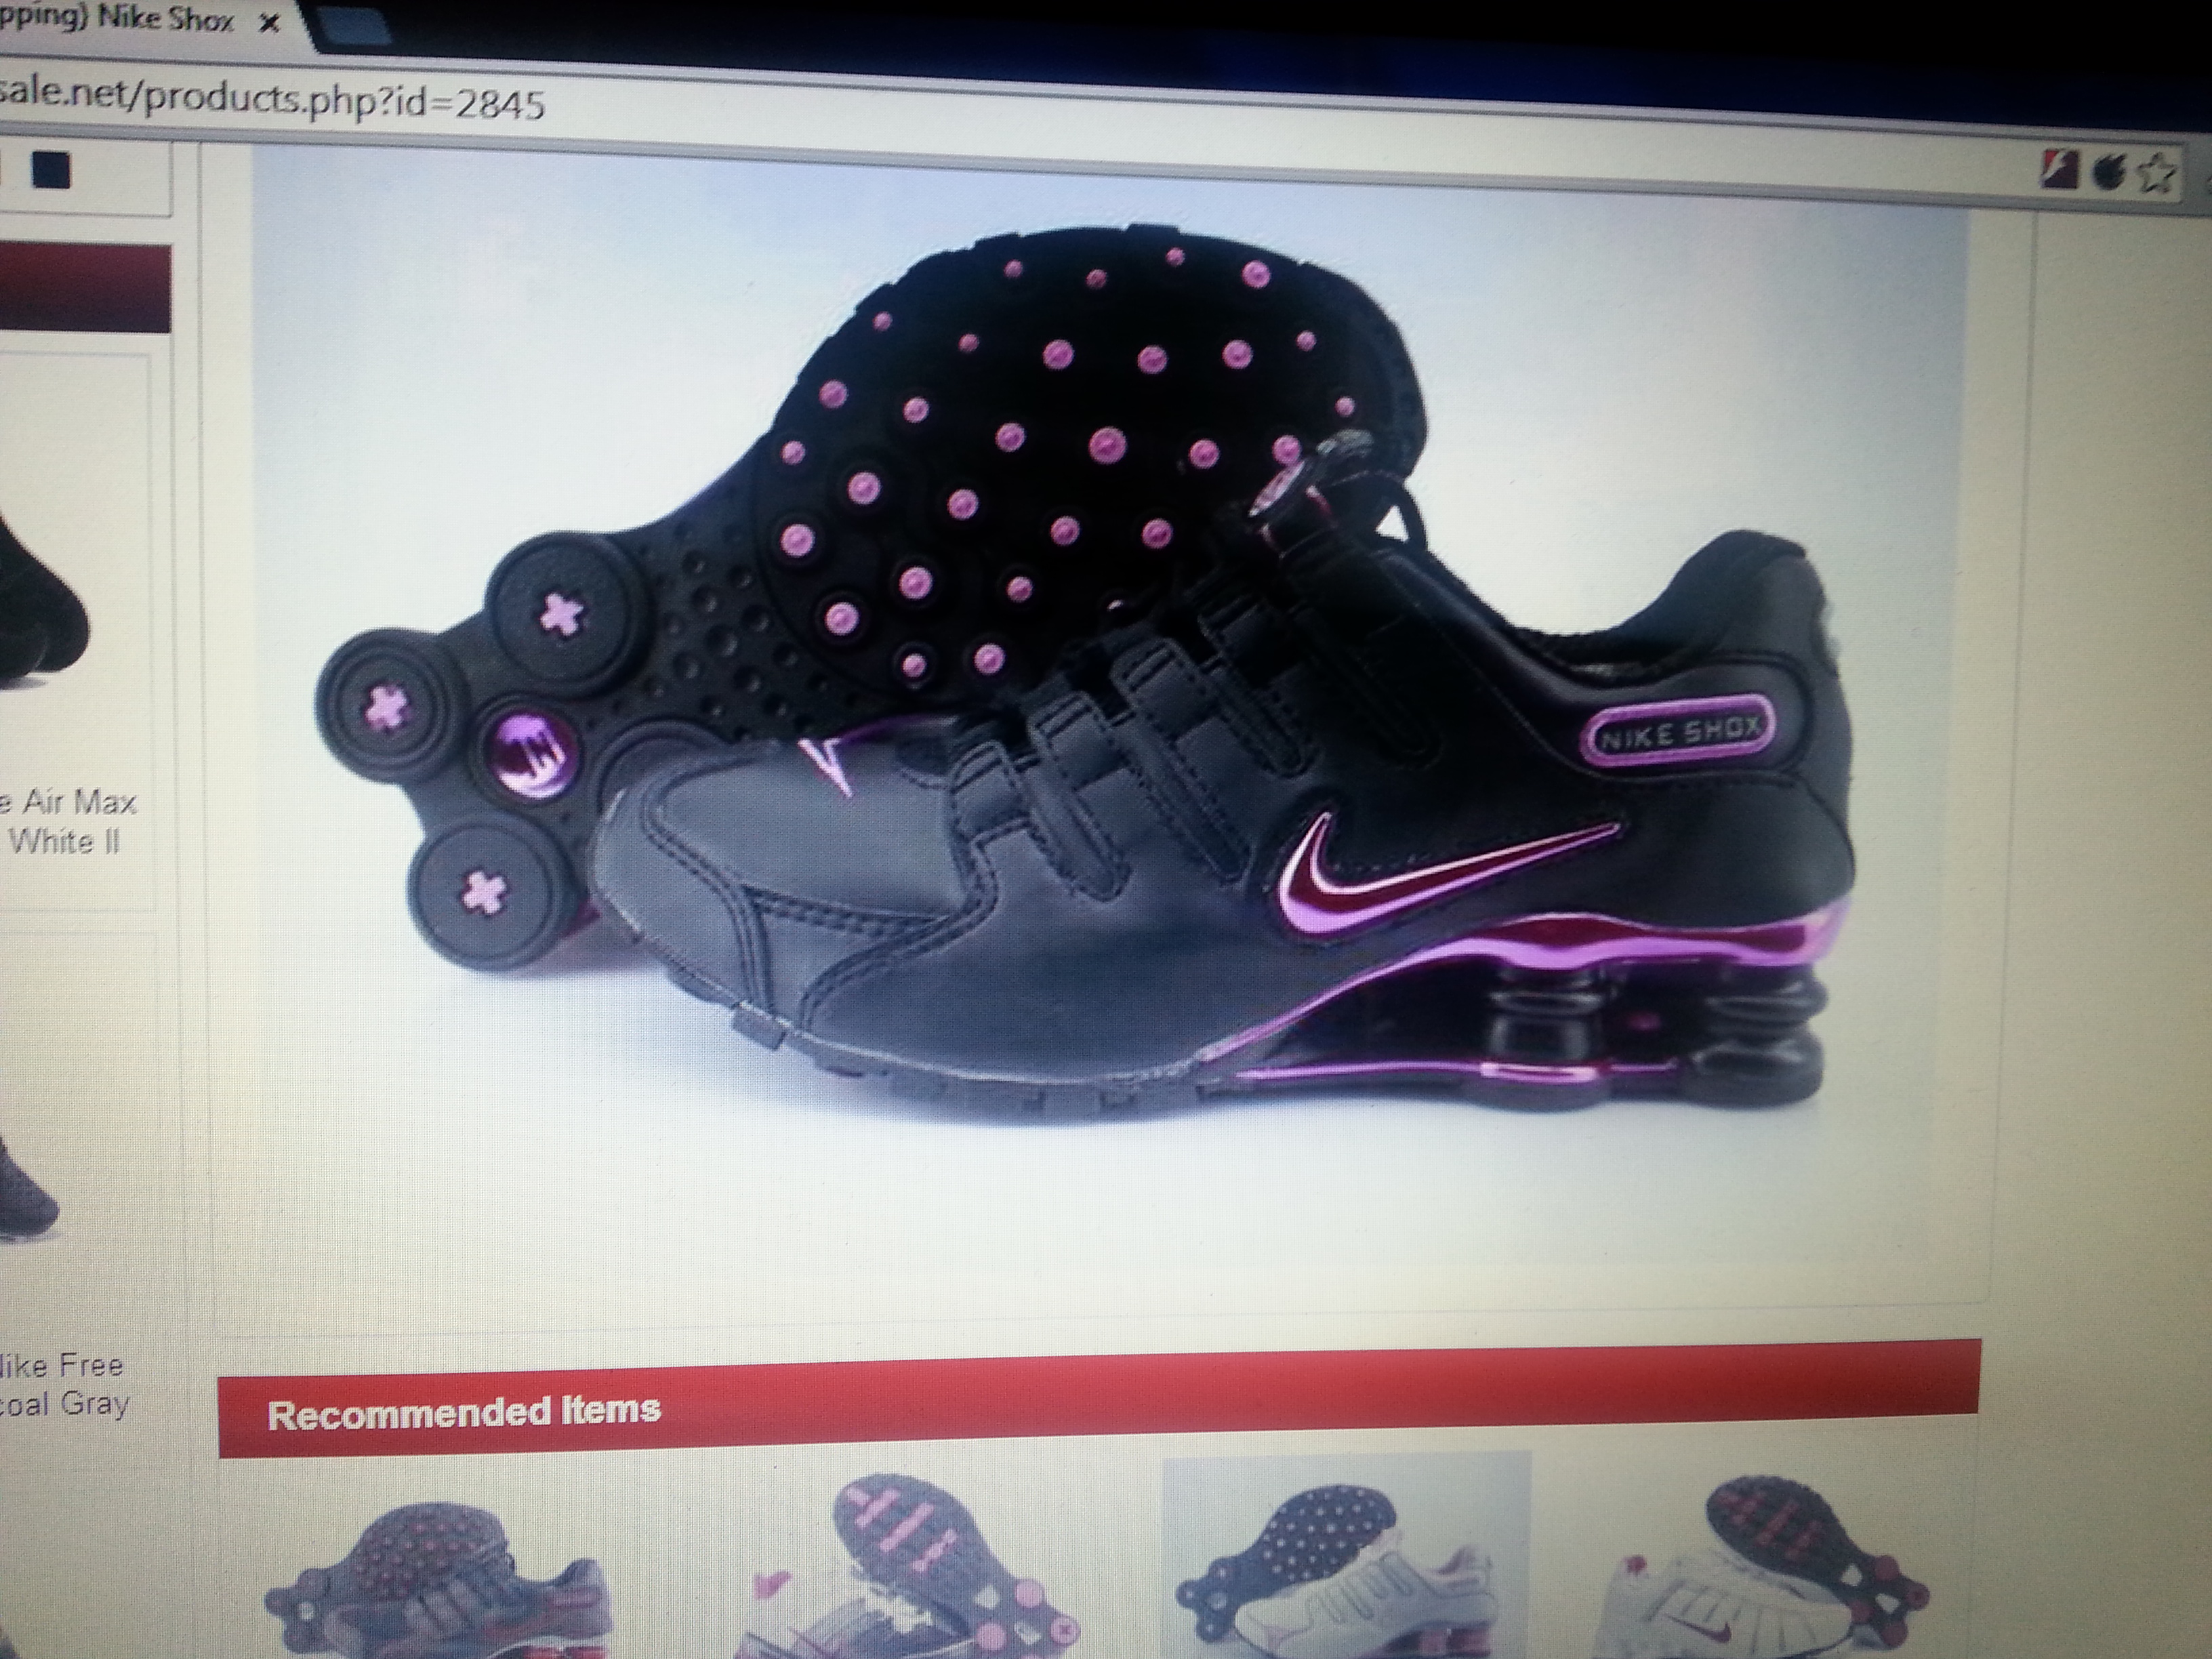 The shoes I ordered